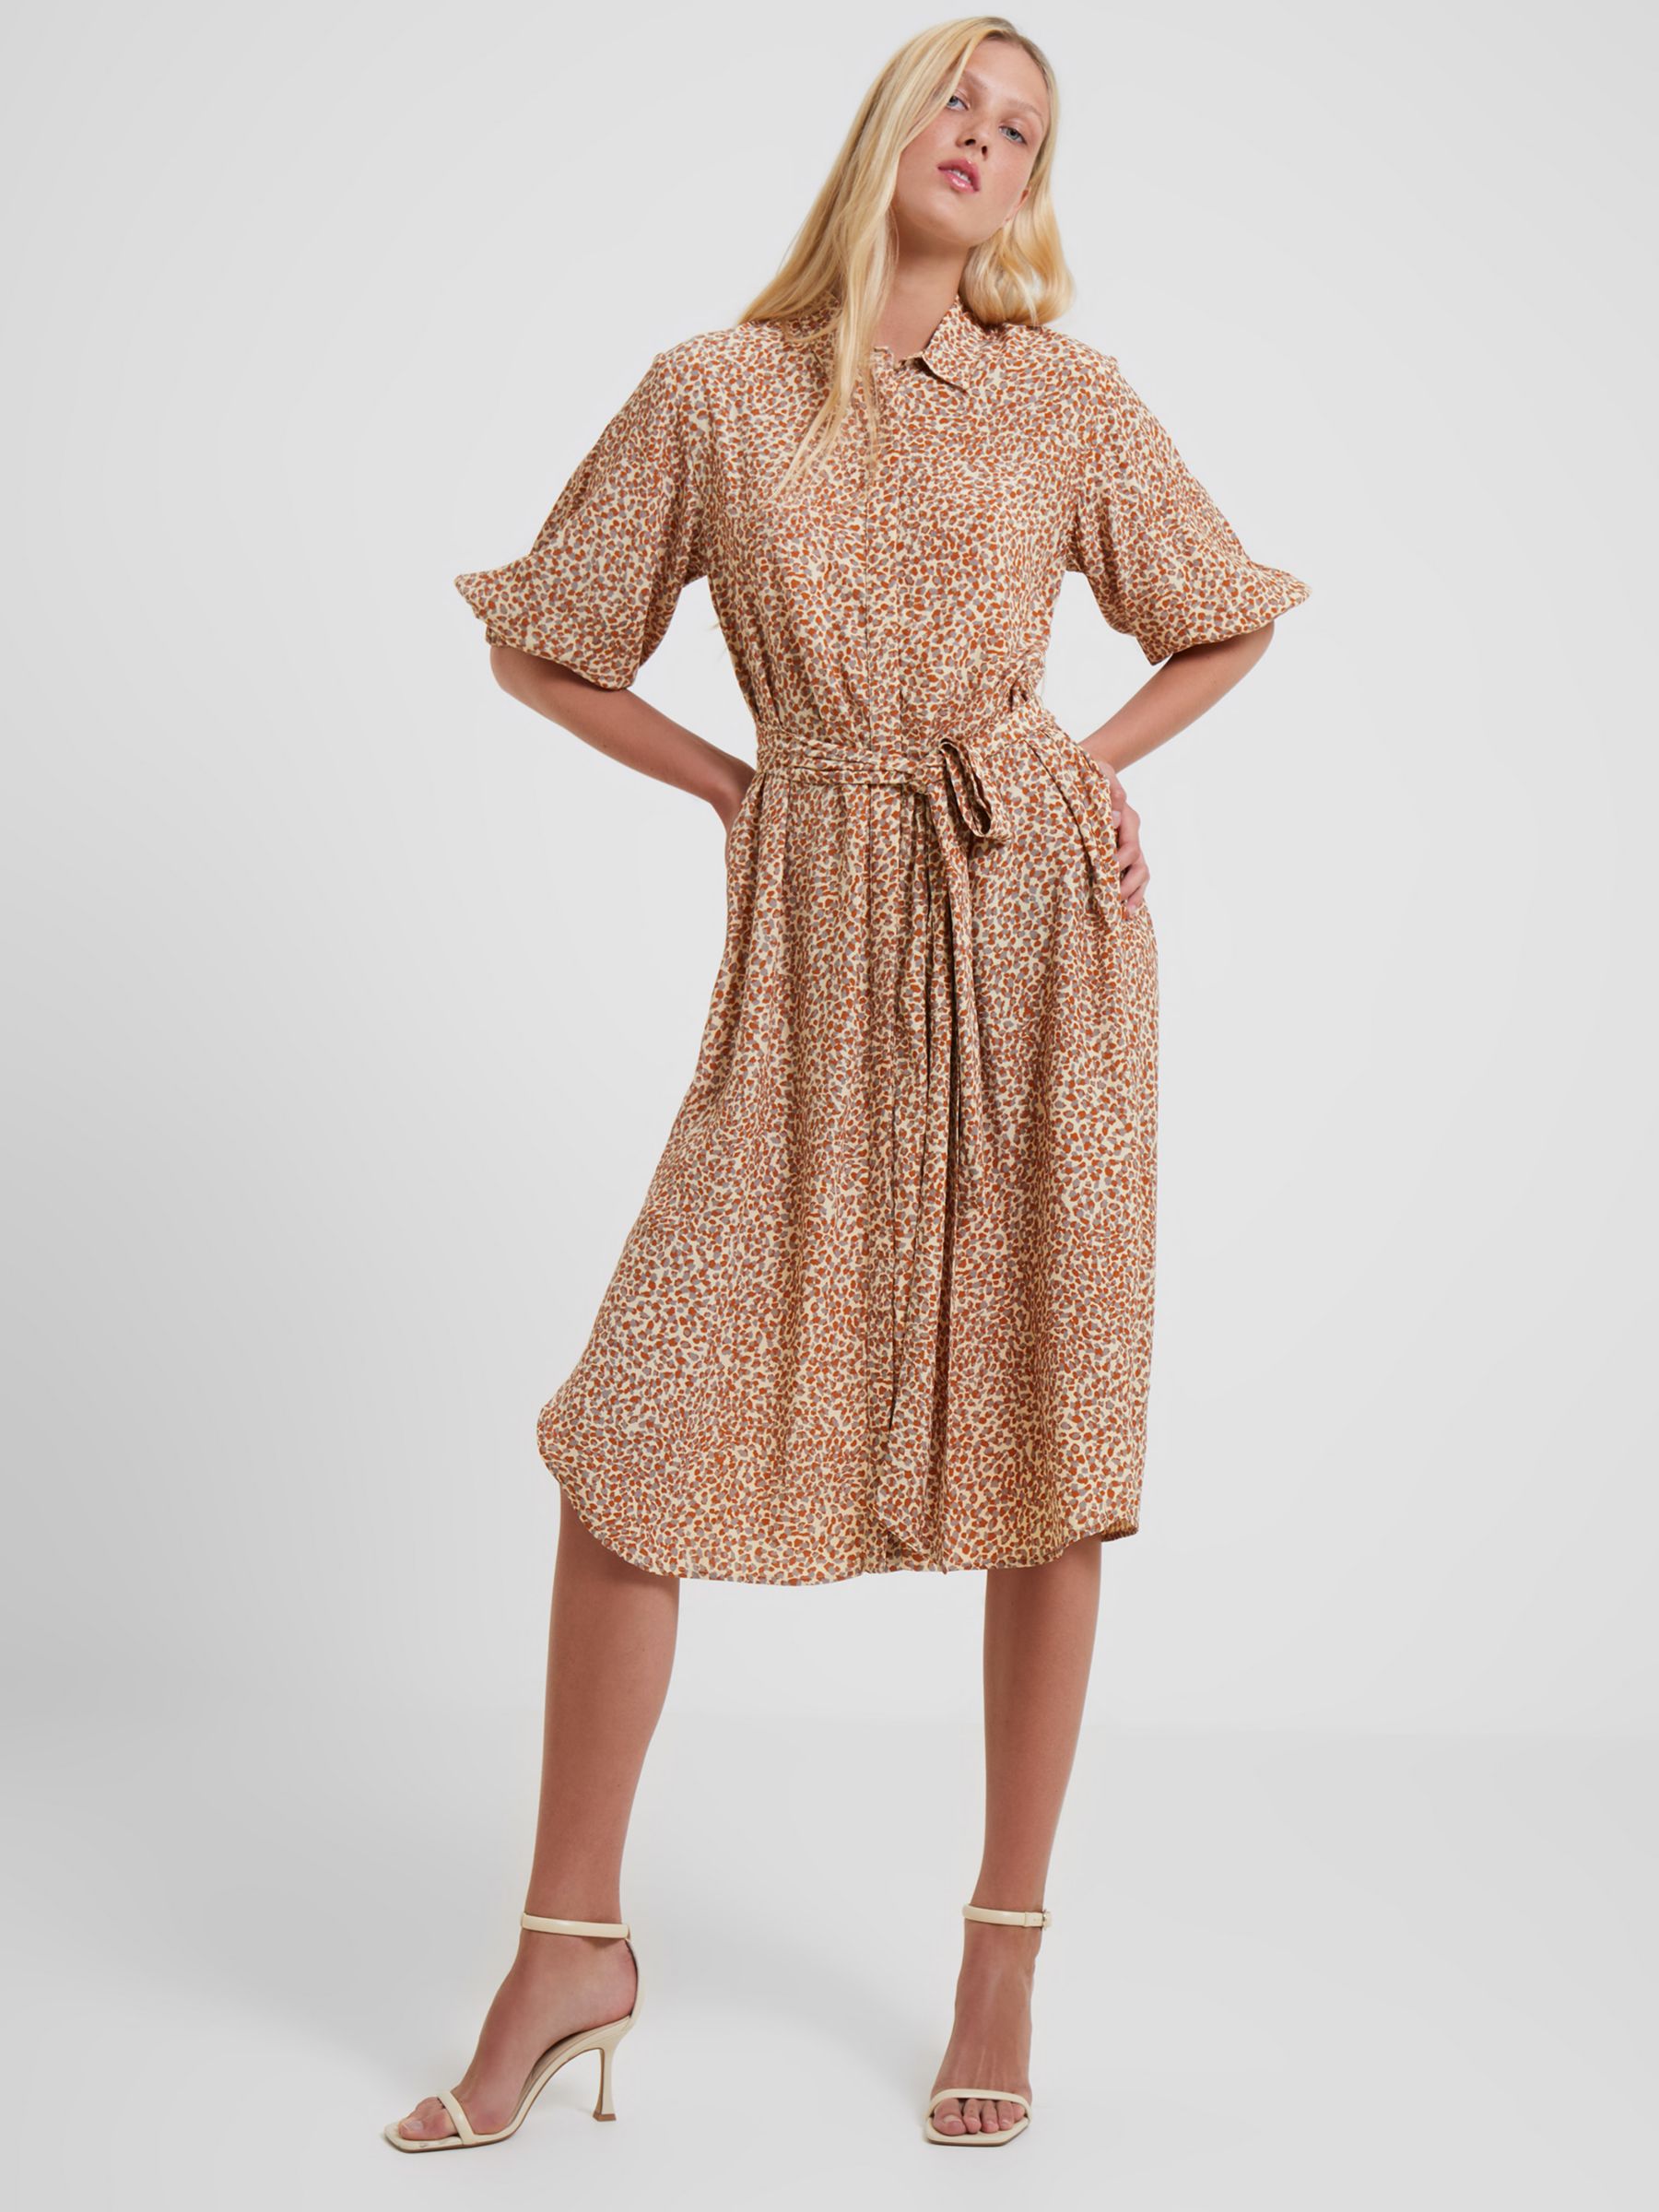 French Connection Cadie Delph Drape Shirt Dress, Shifting Sand, XL